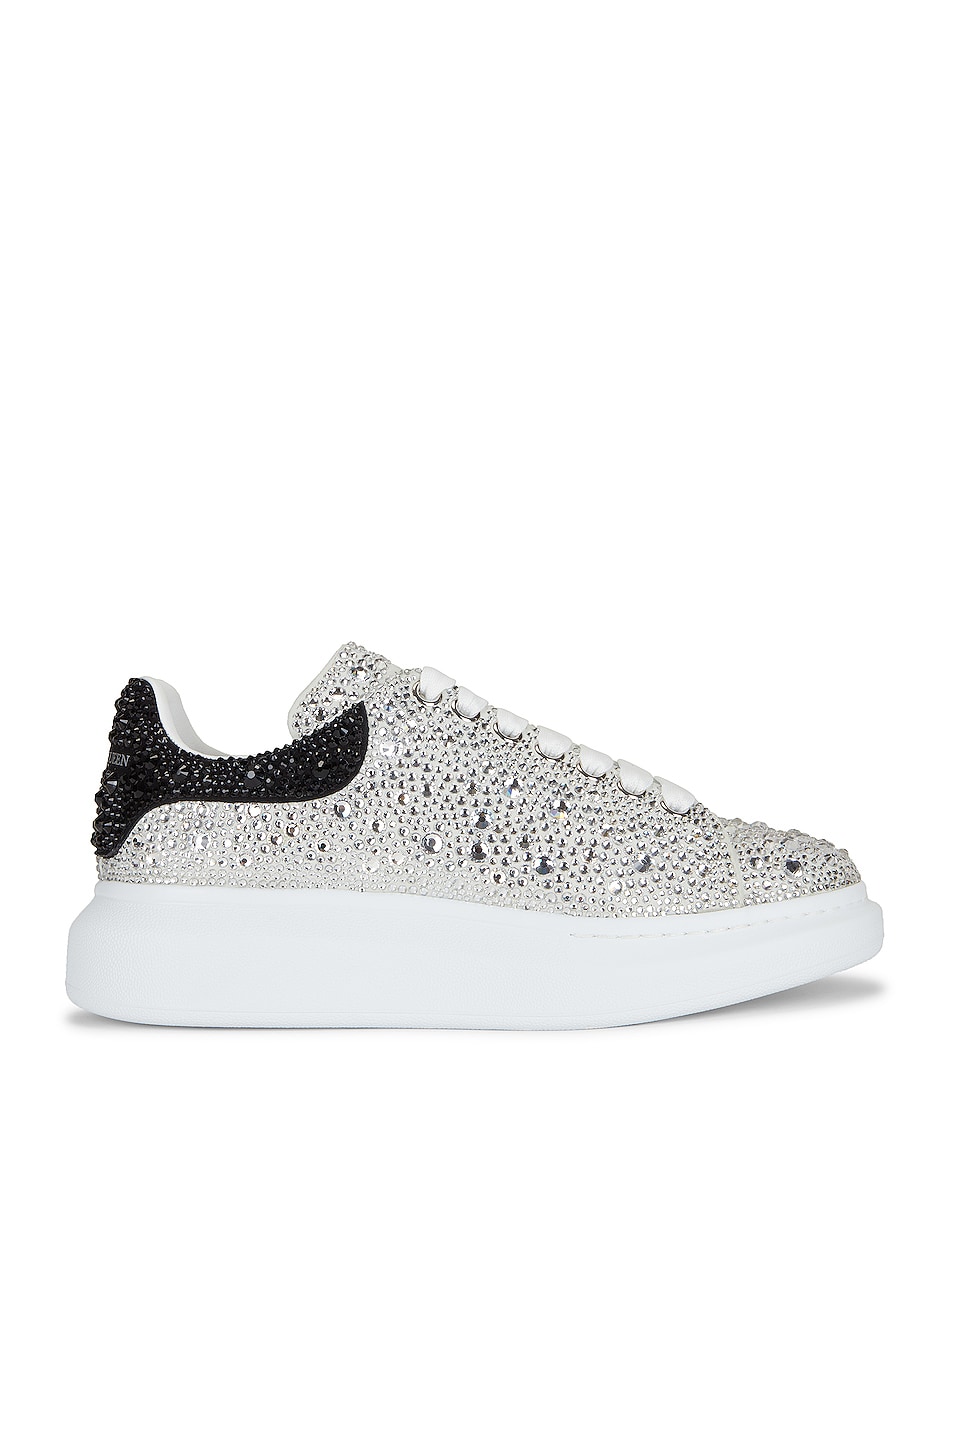 Image 1 of Alexander McQueen Leather Sneaker in White, Black, & Crystal